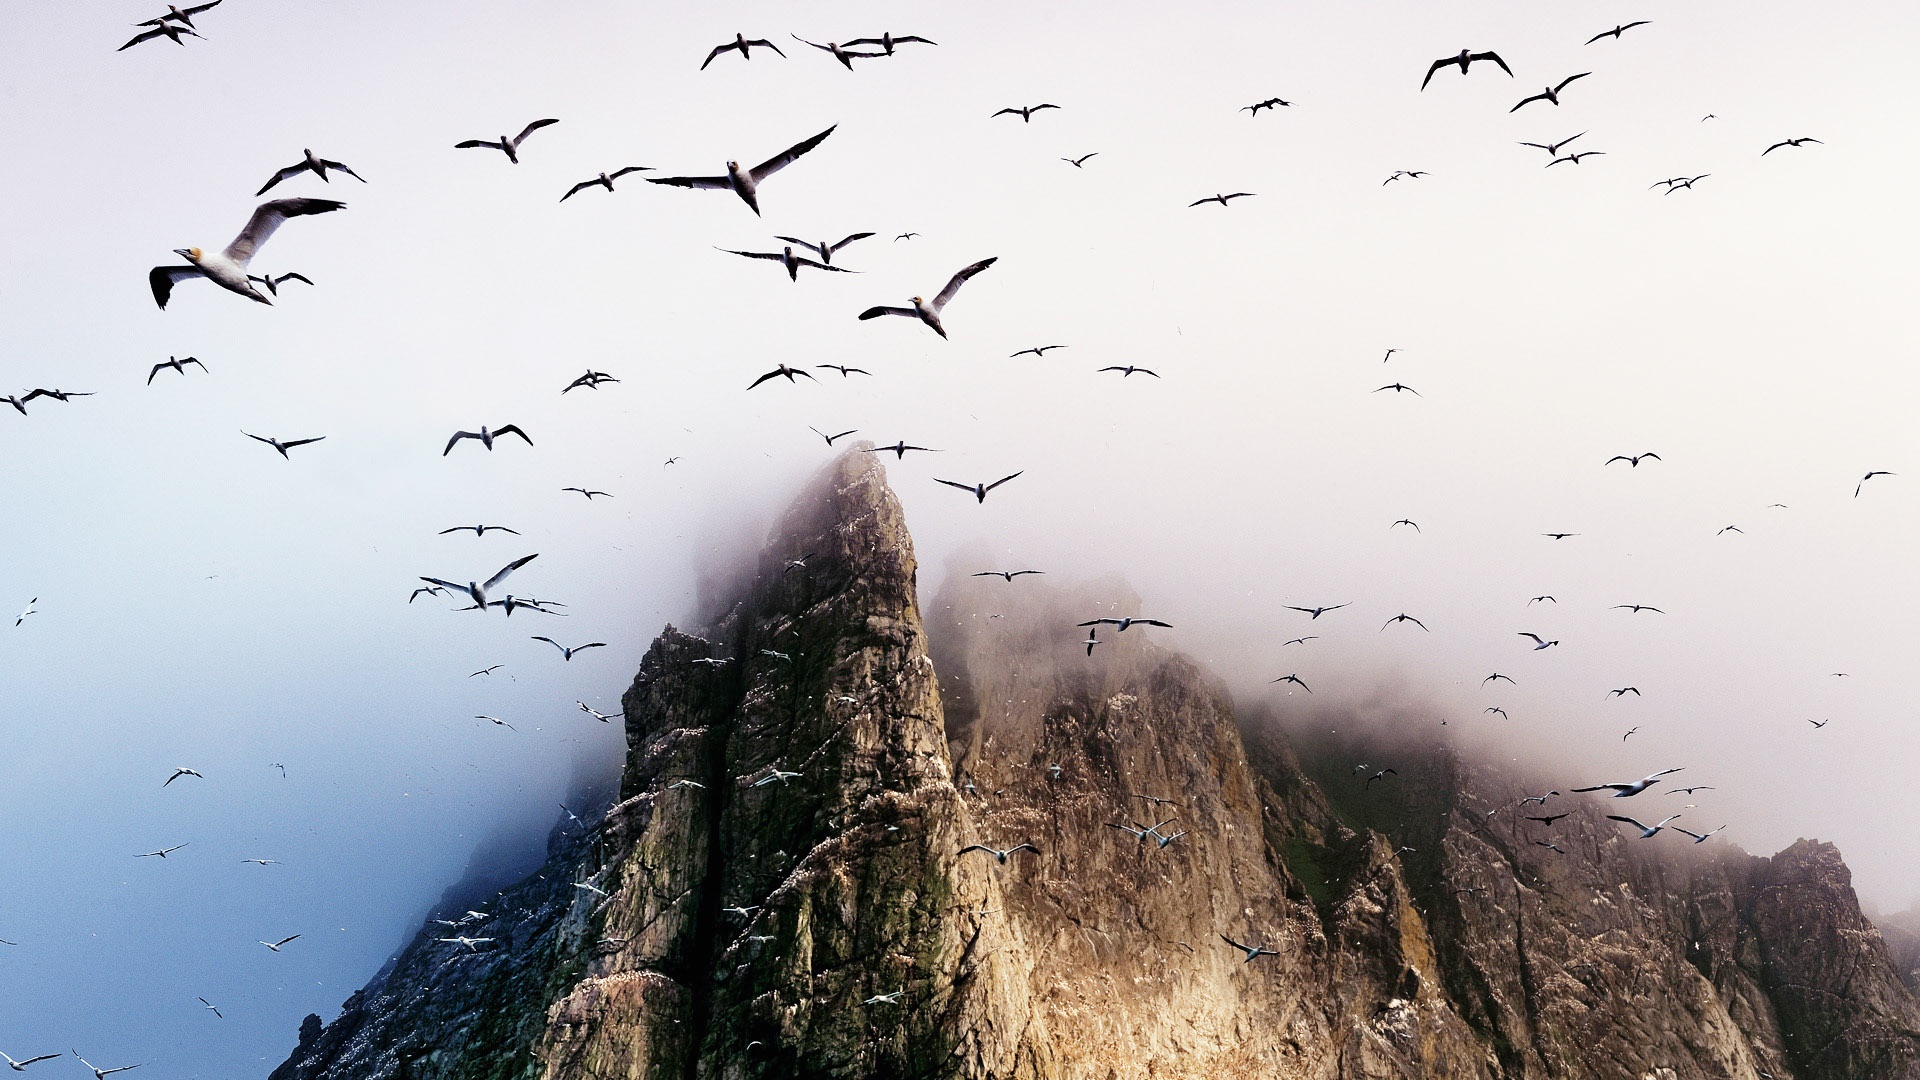 birds-miracle-of-migration-1920x1080.jpg